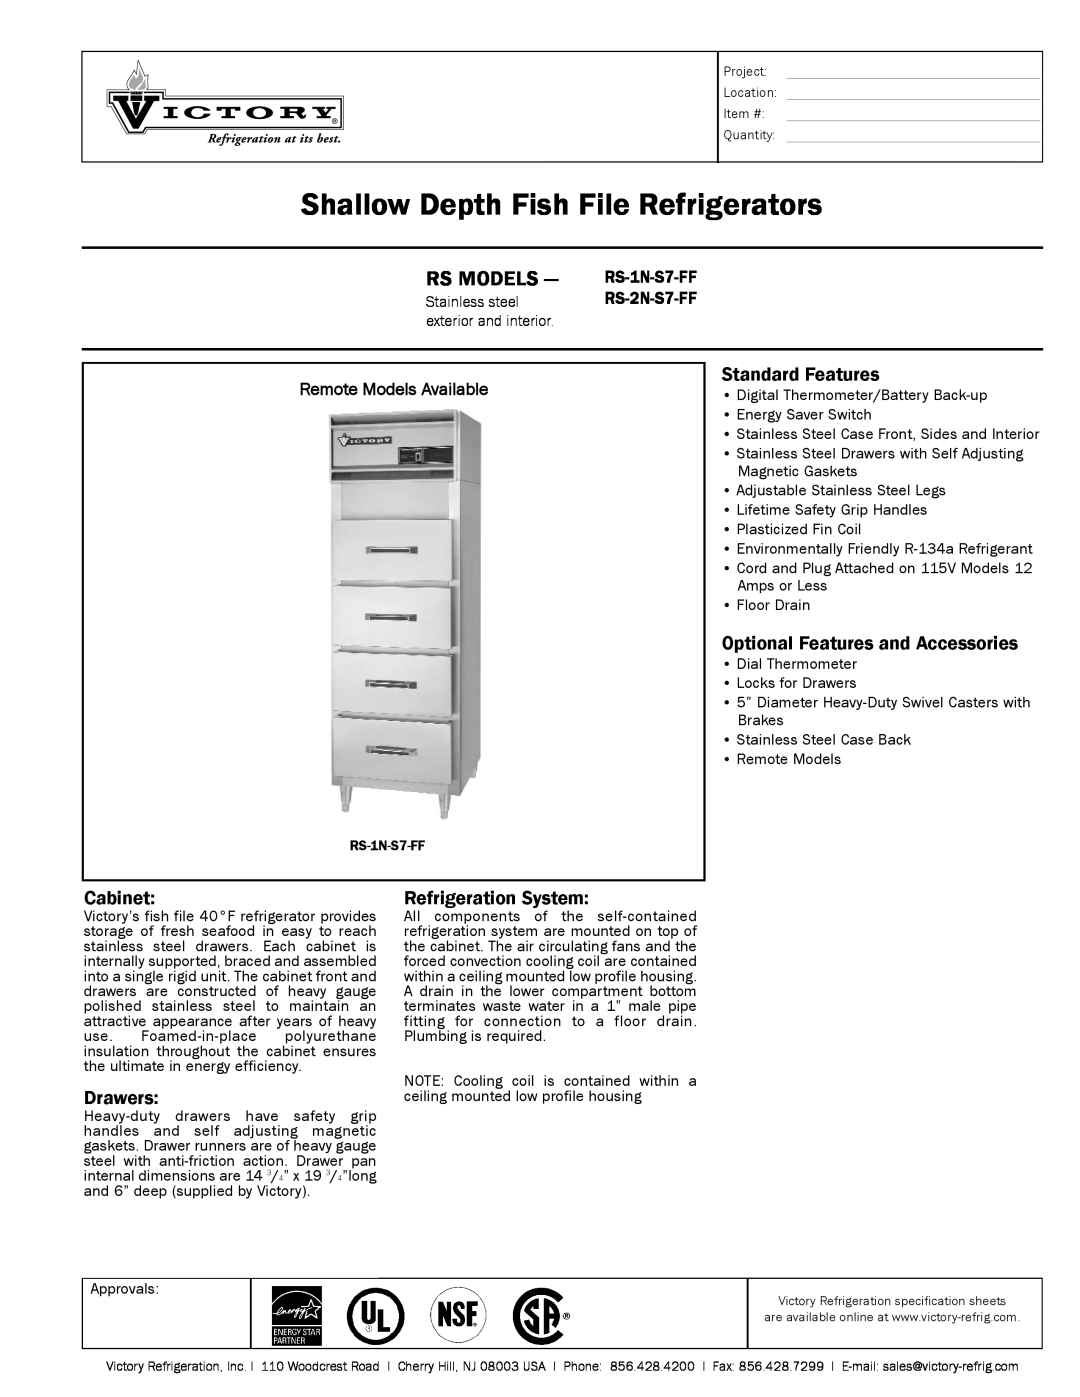 Victory Refrigeration RS-2N-S7-FF dimensions Shallow Depth Fish File Refrigerators, Rs Models, Standard Features, Cabinet 